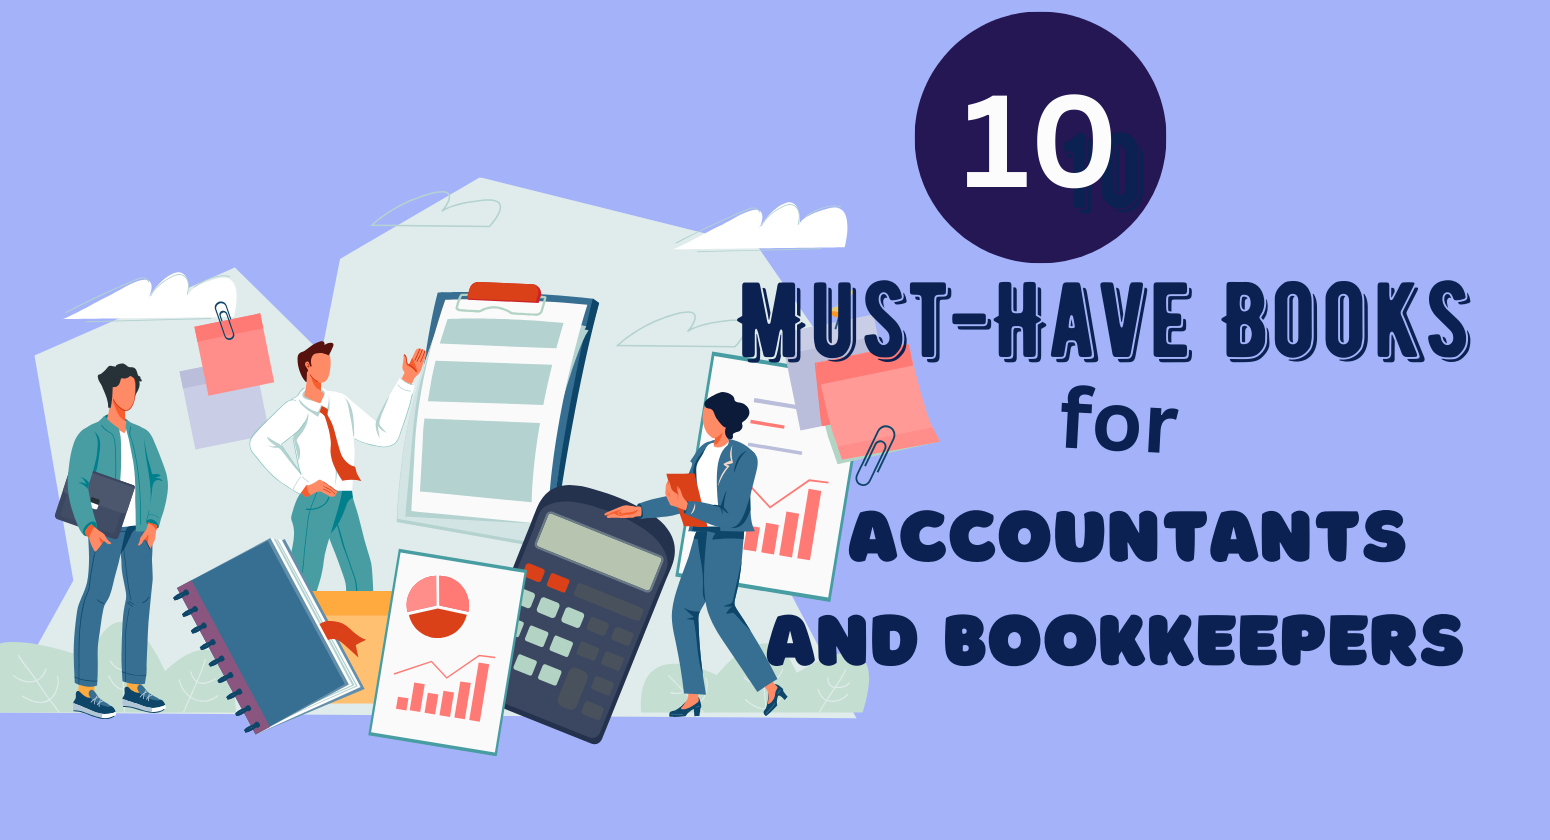 10 Must-Have Books for Accountants and Bookkeepers